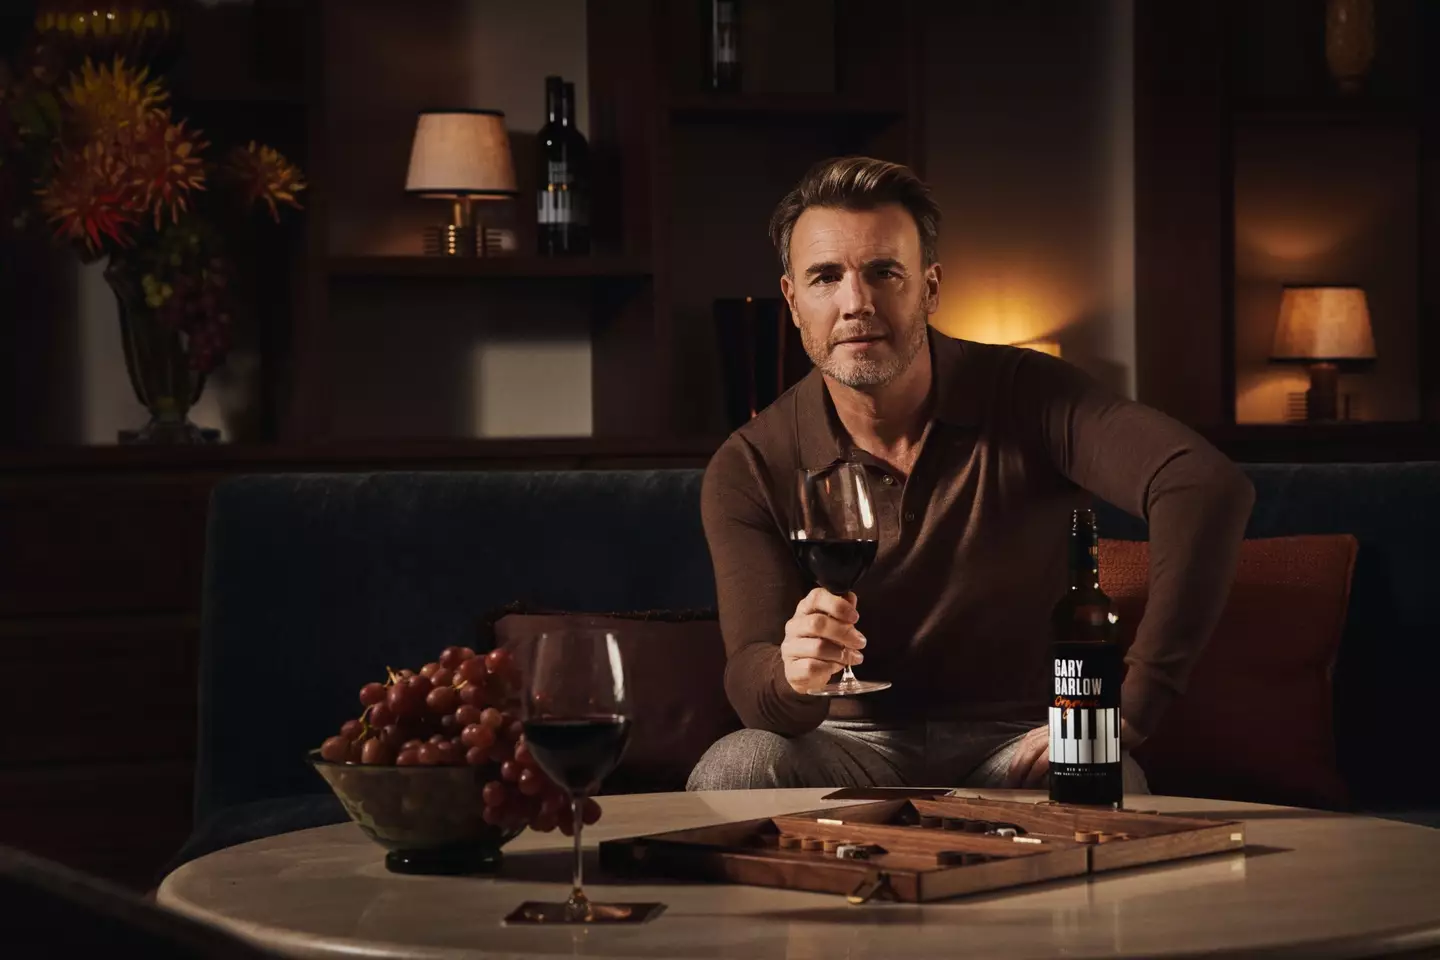 Gary Barlow revealed his wine collection on social media (